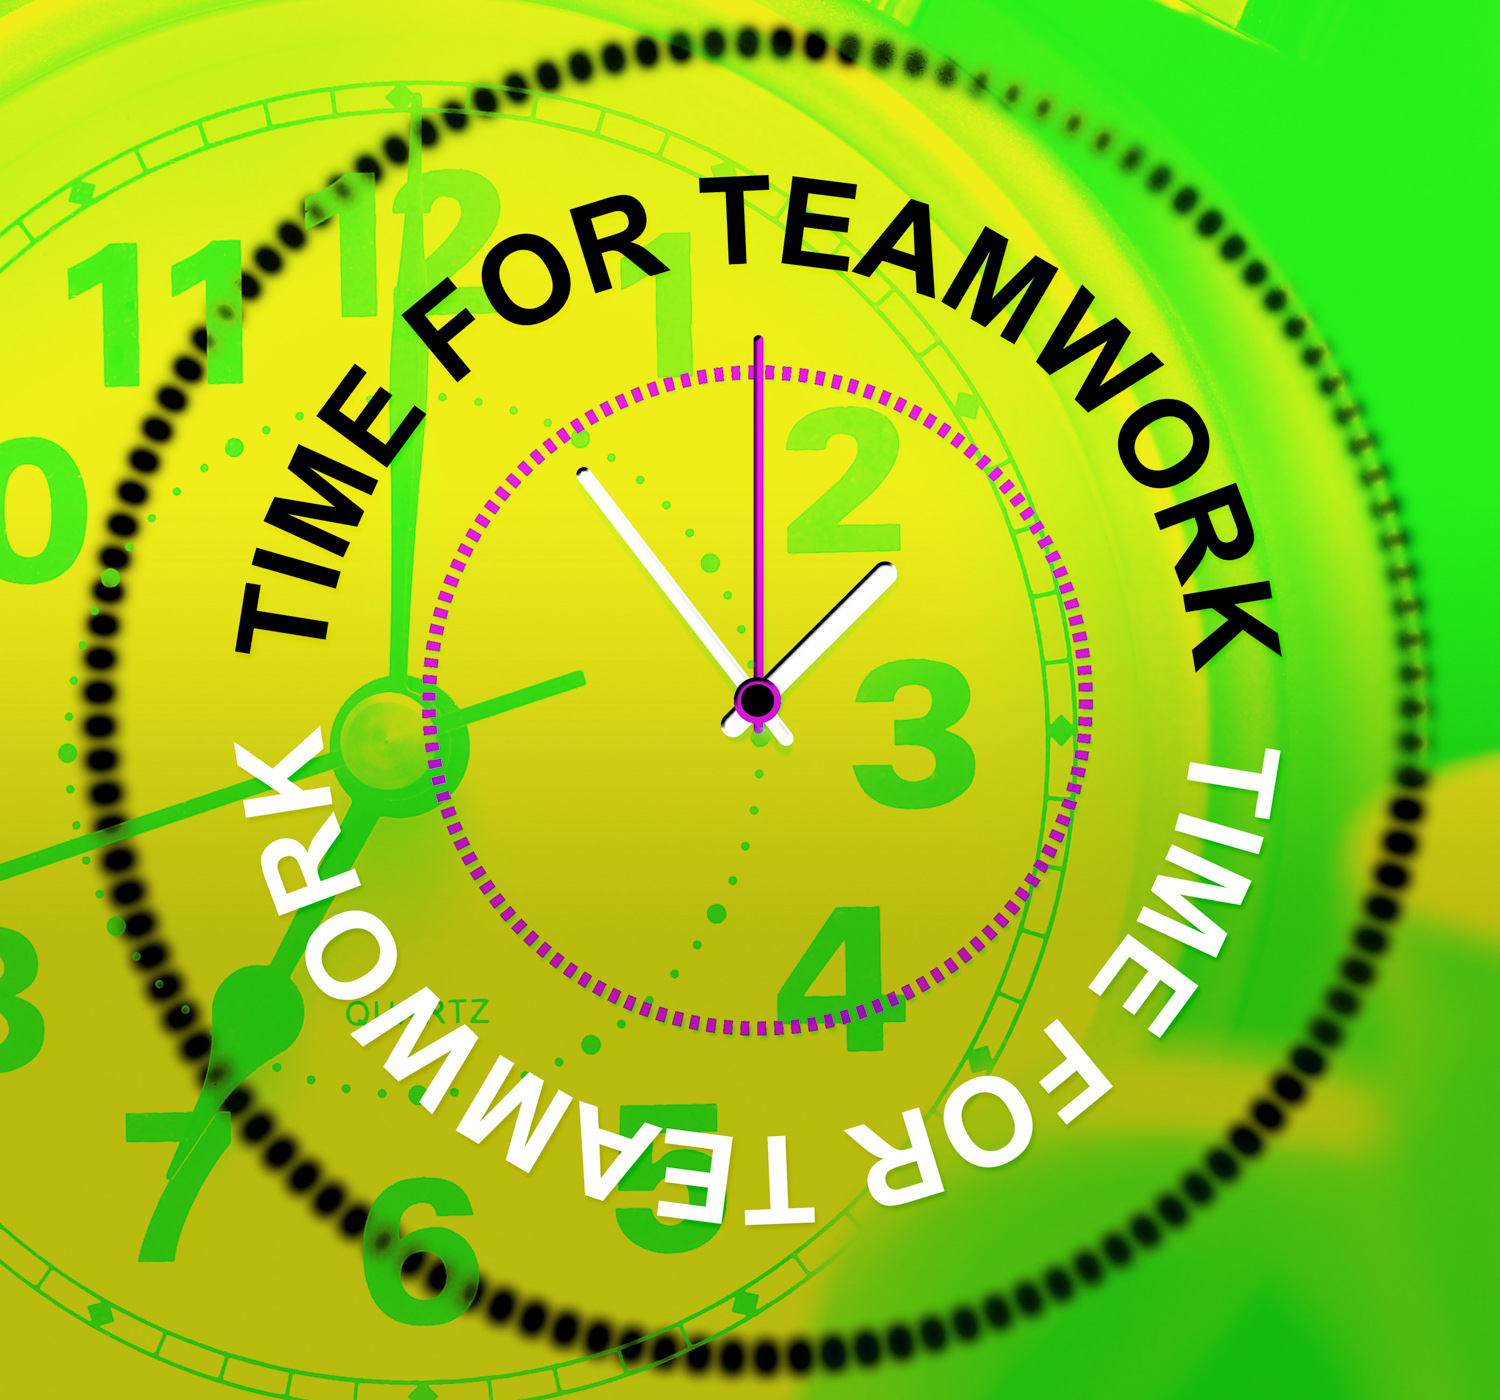 Time for teamwork represents networking group and organized photo